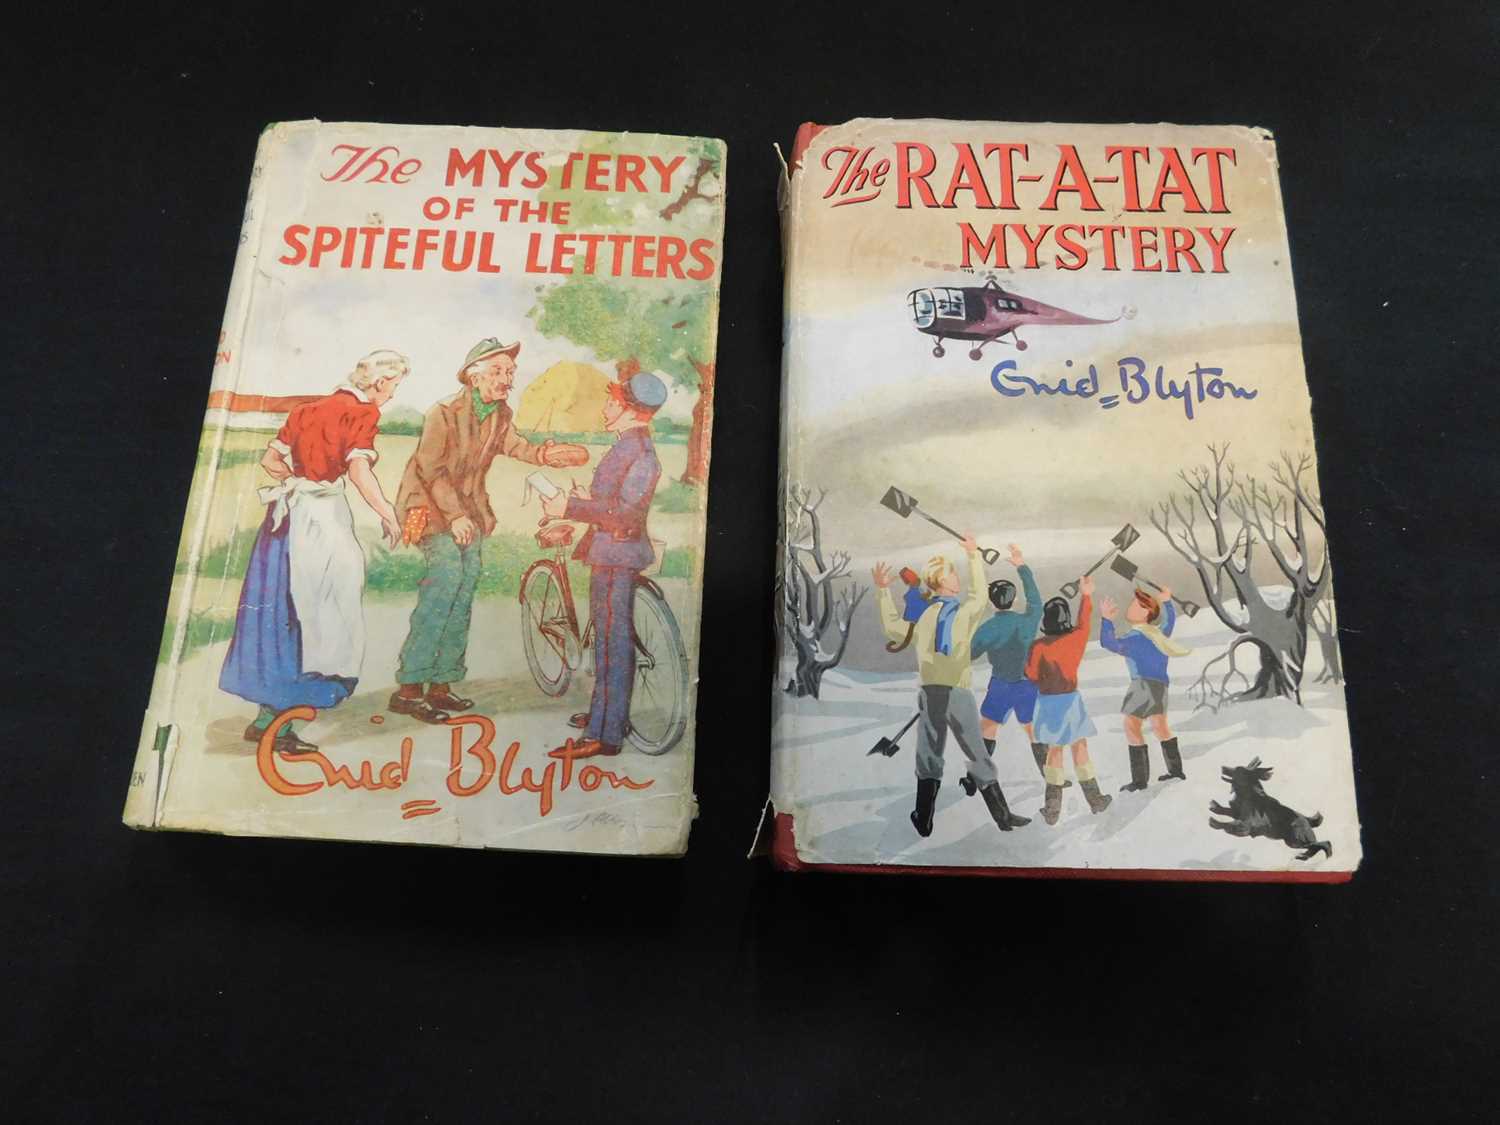 ENID BLYTON: THE MYSTERY OF THE SPITEFUL LETTERS, ill J Avvey, London, Methuen, 1946, first edition,